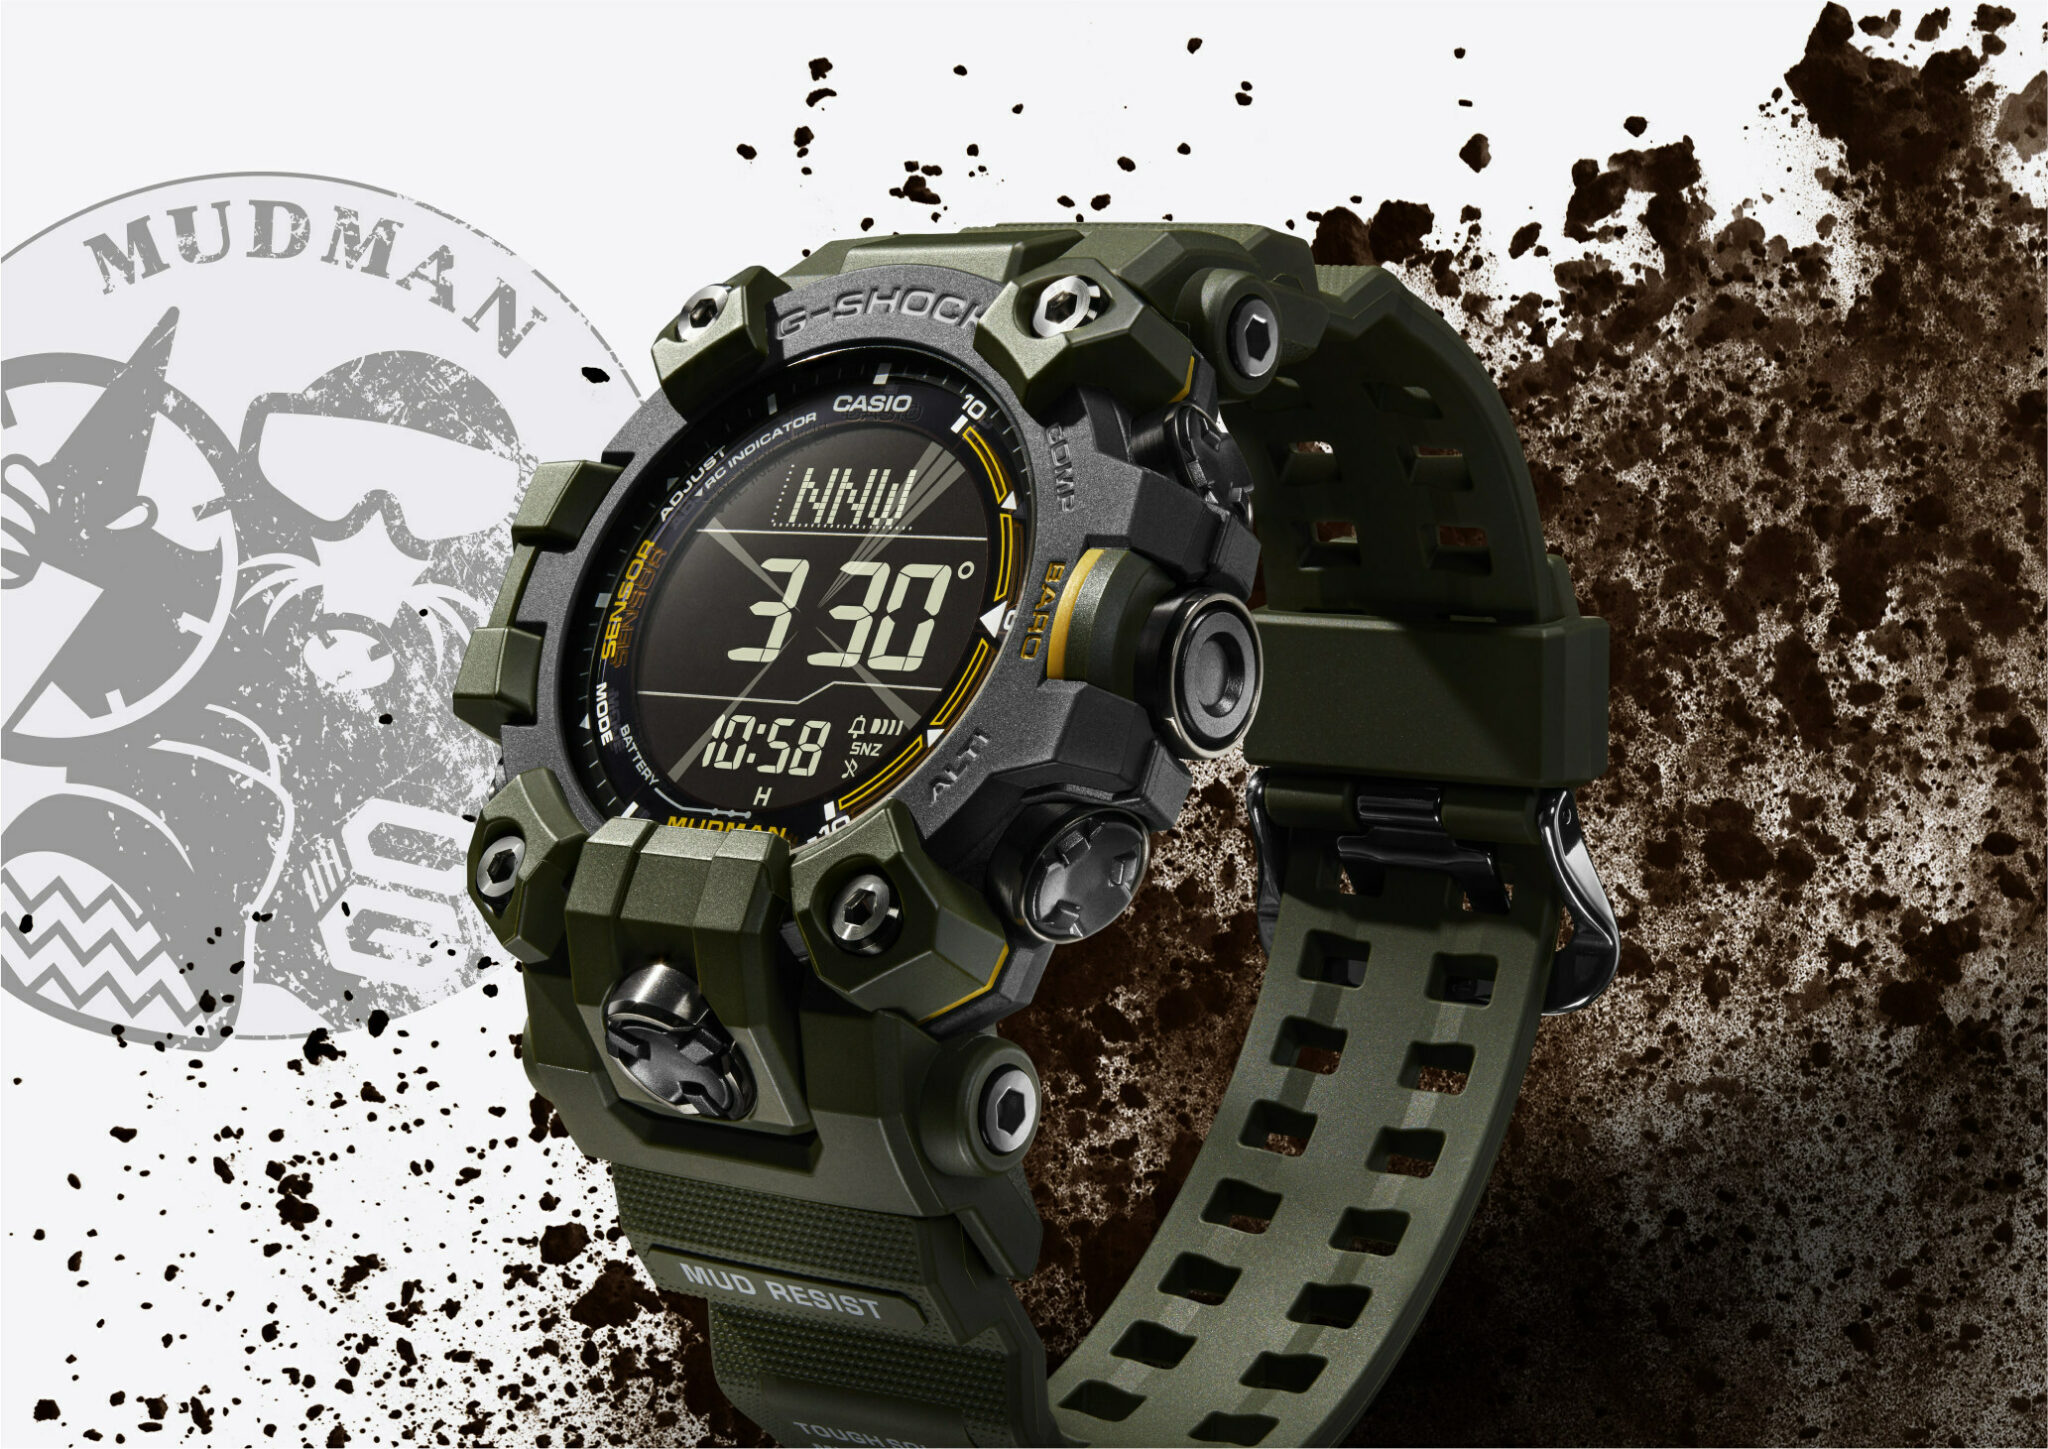 Casio G-Shock Mud- and Shock-Resistant Watch India | Ubuy